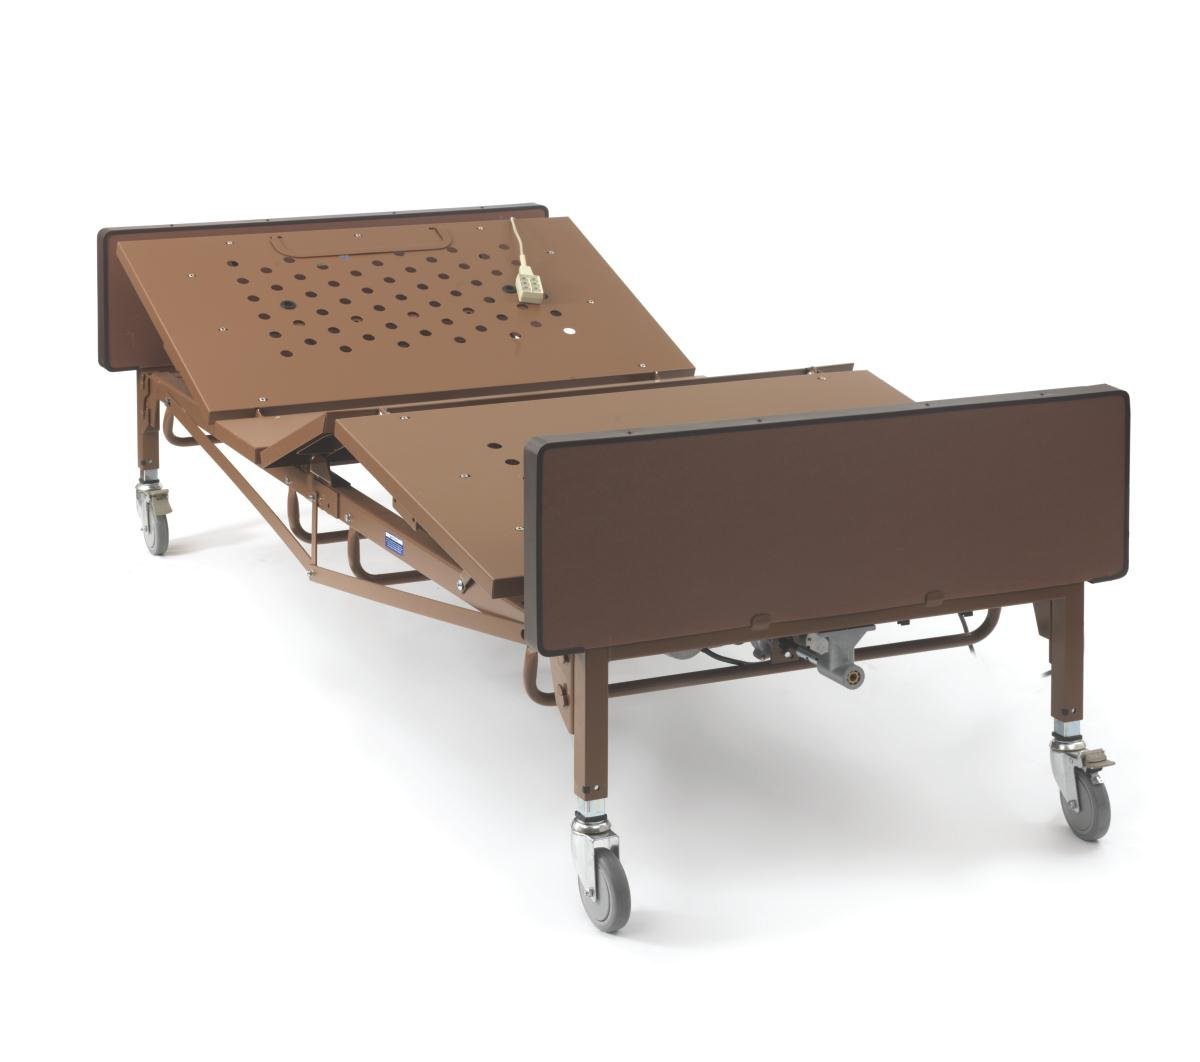 Medline Bariatric Full Electric Bed